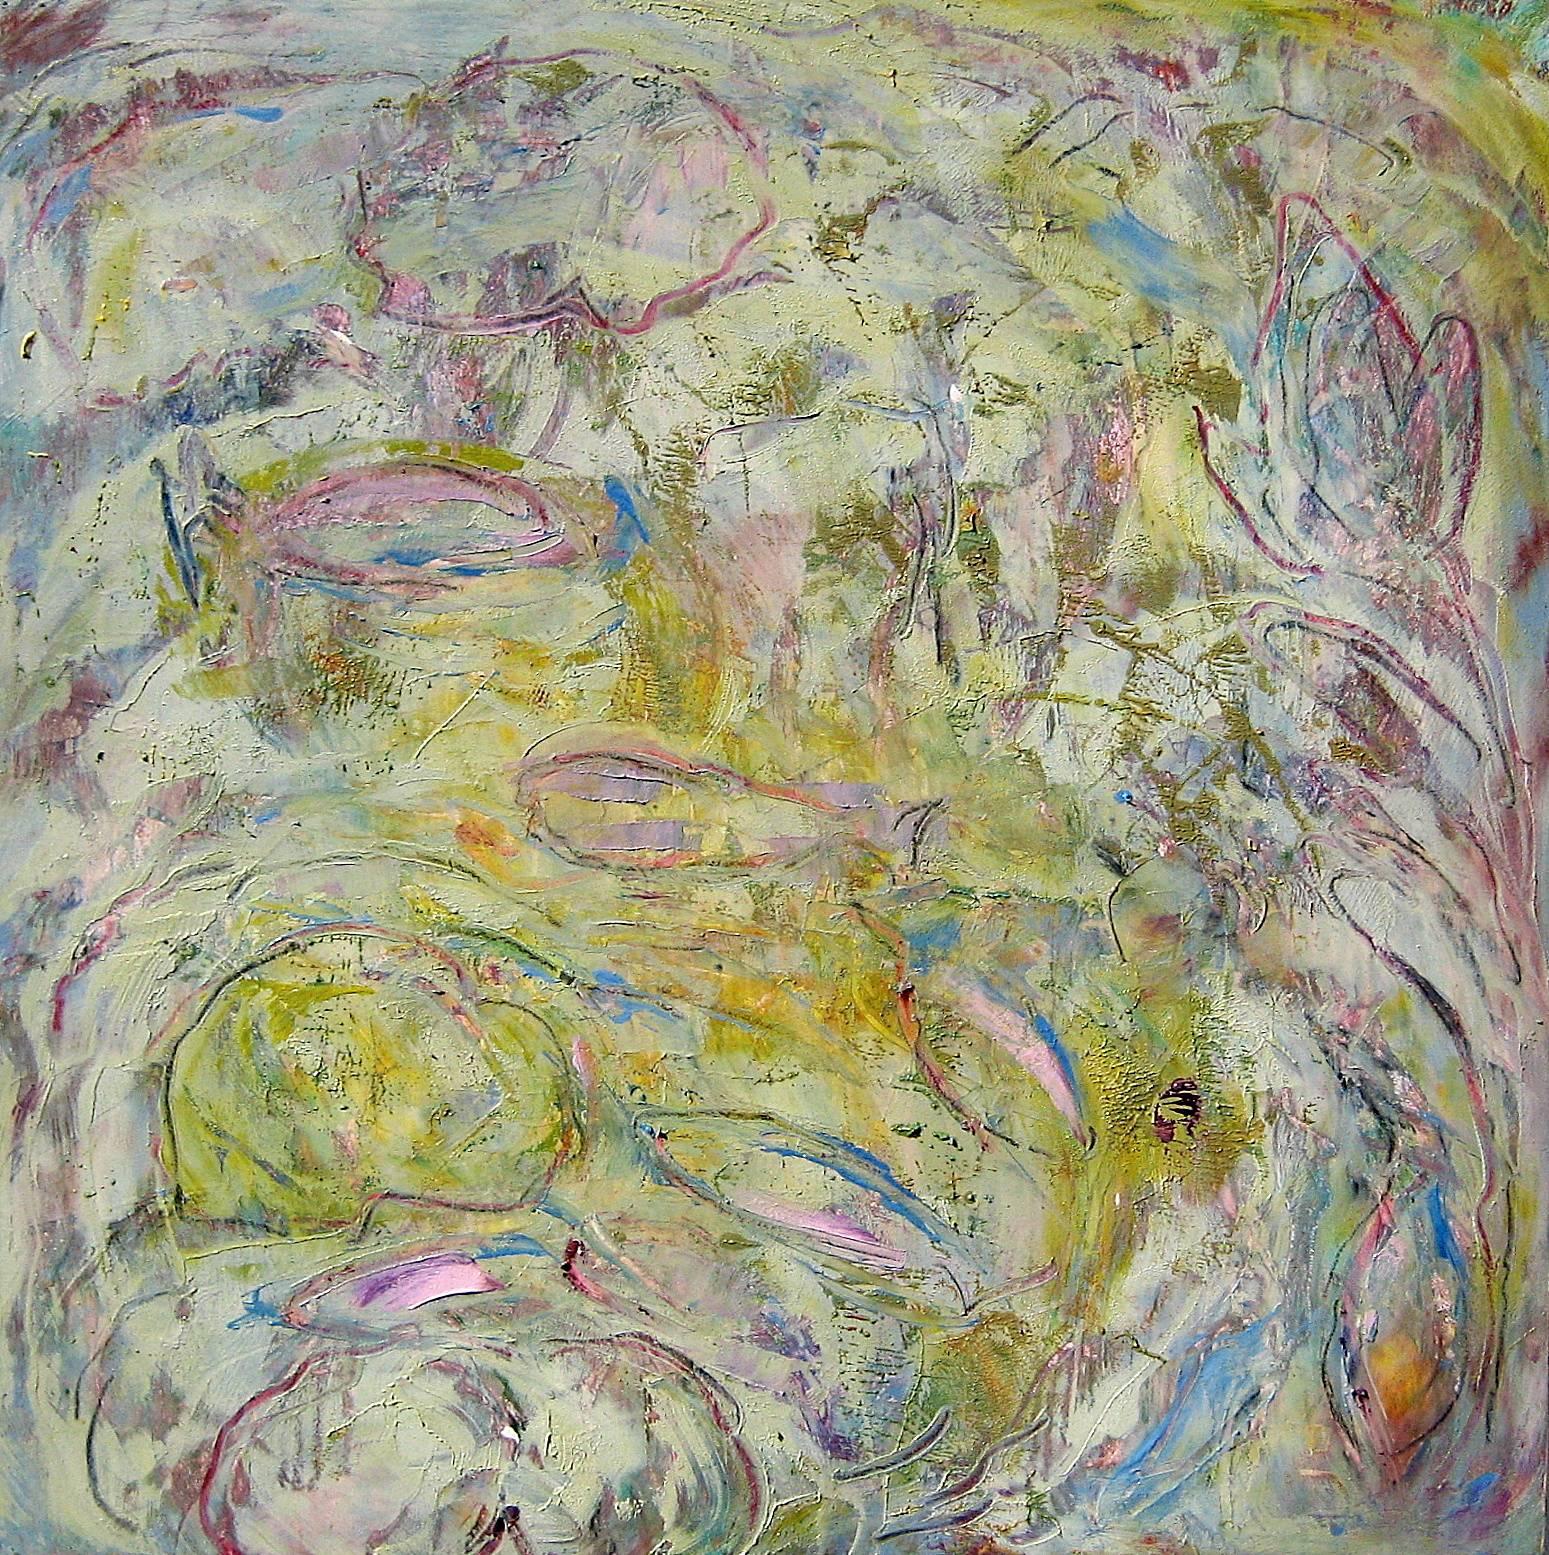 "Little Fish in a Big Pond", abstract, pinks, golds, pigment stick, oil painting